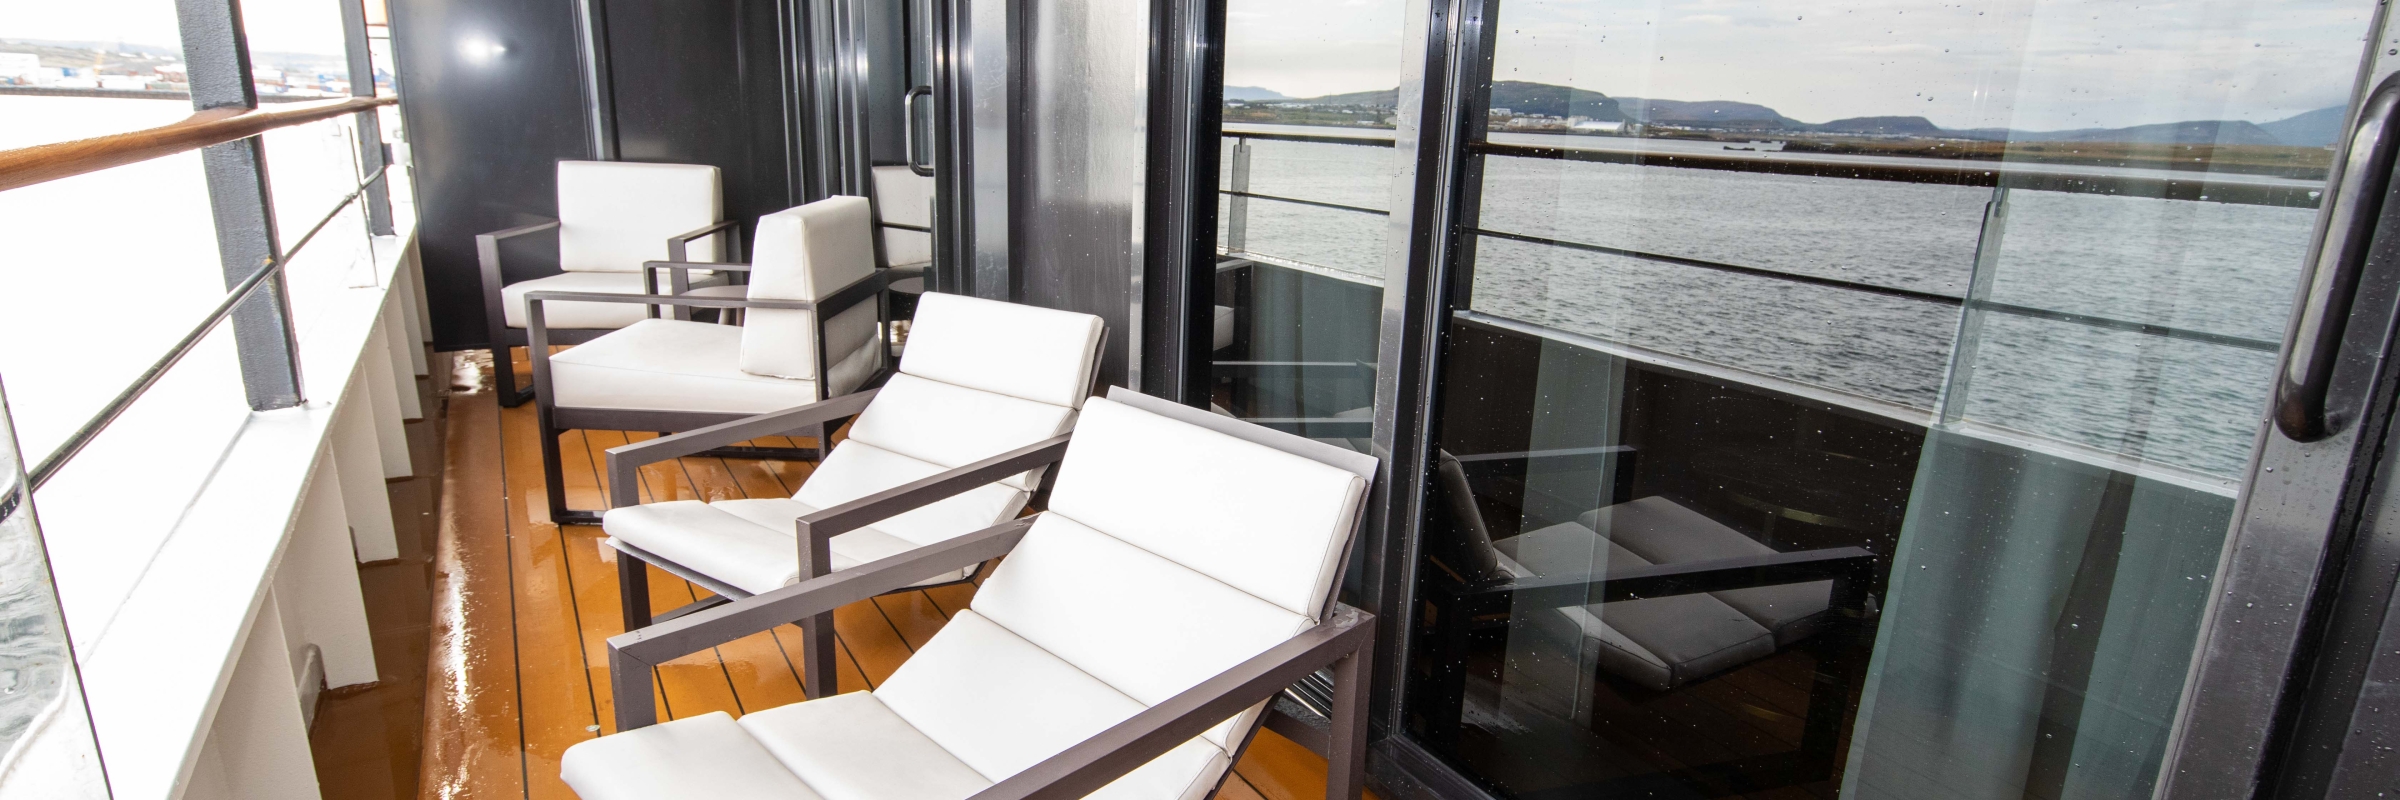 Owner's Suite private balcony aboard World Explorer